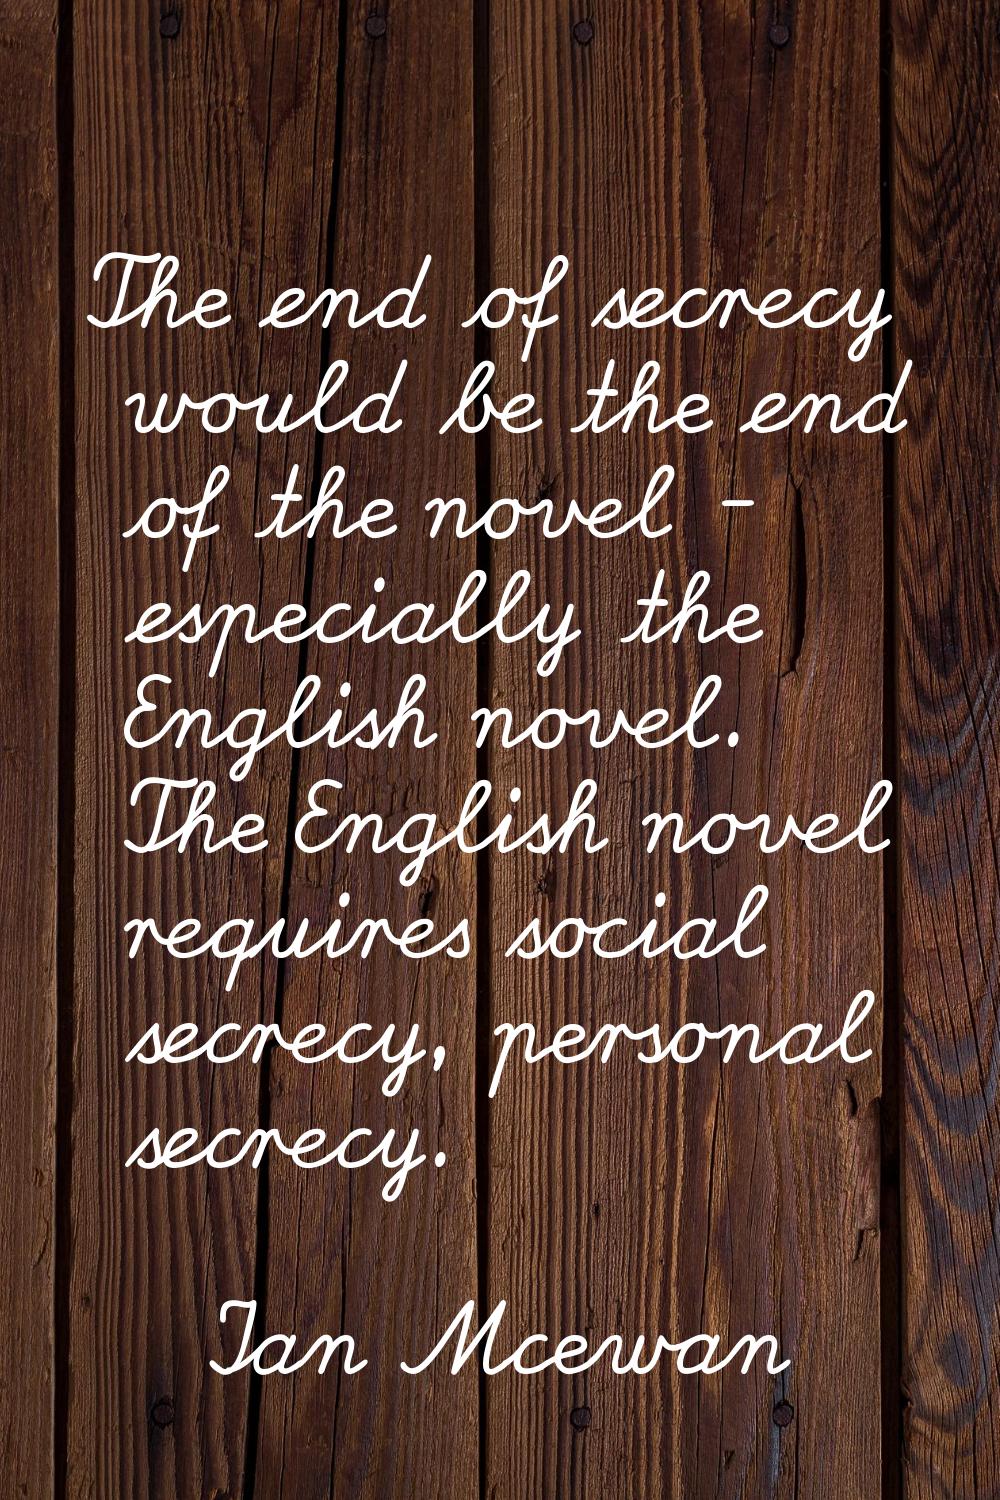 The end of secrecy would be the end of the novel - especially the English novel. The English novel 